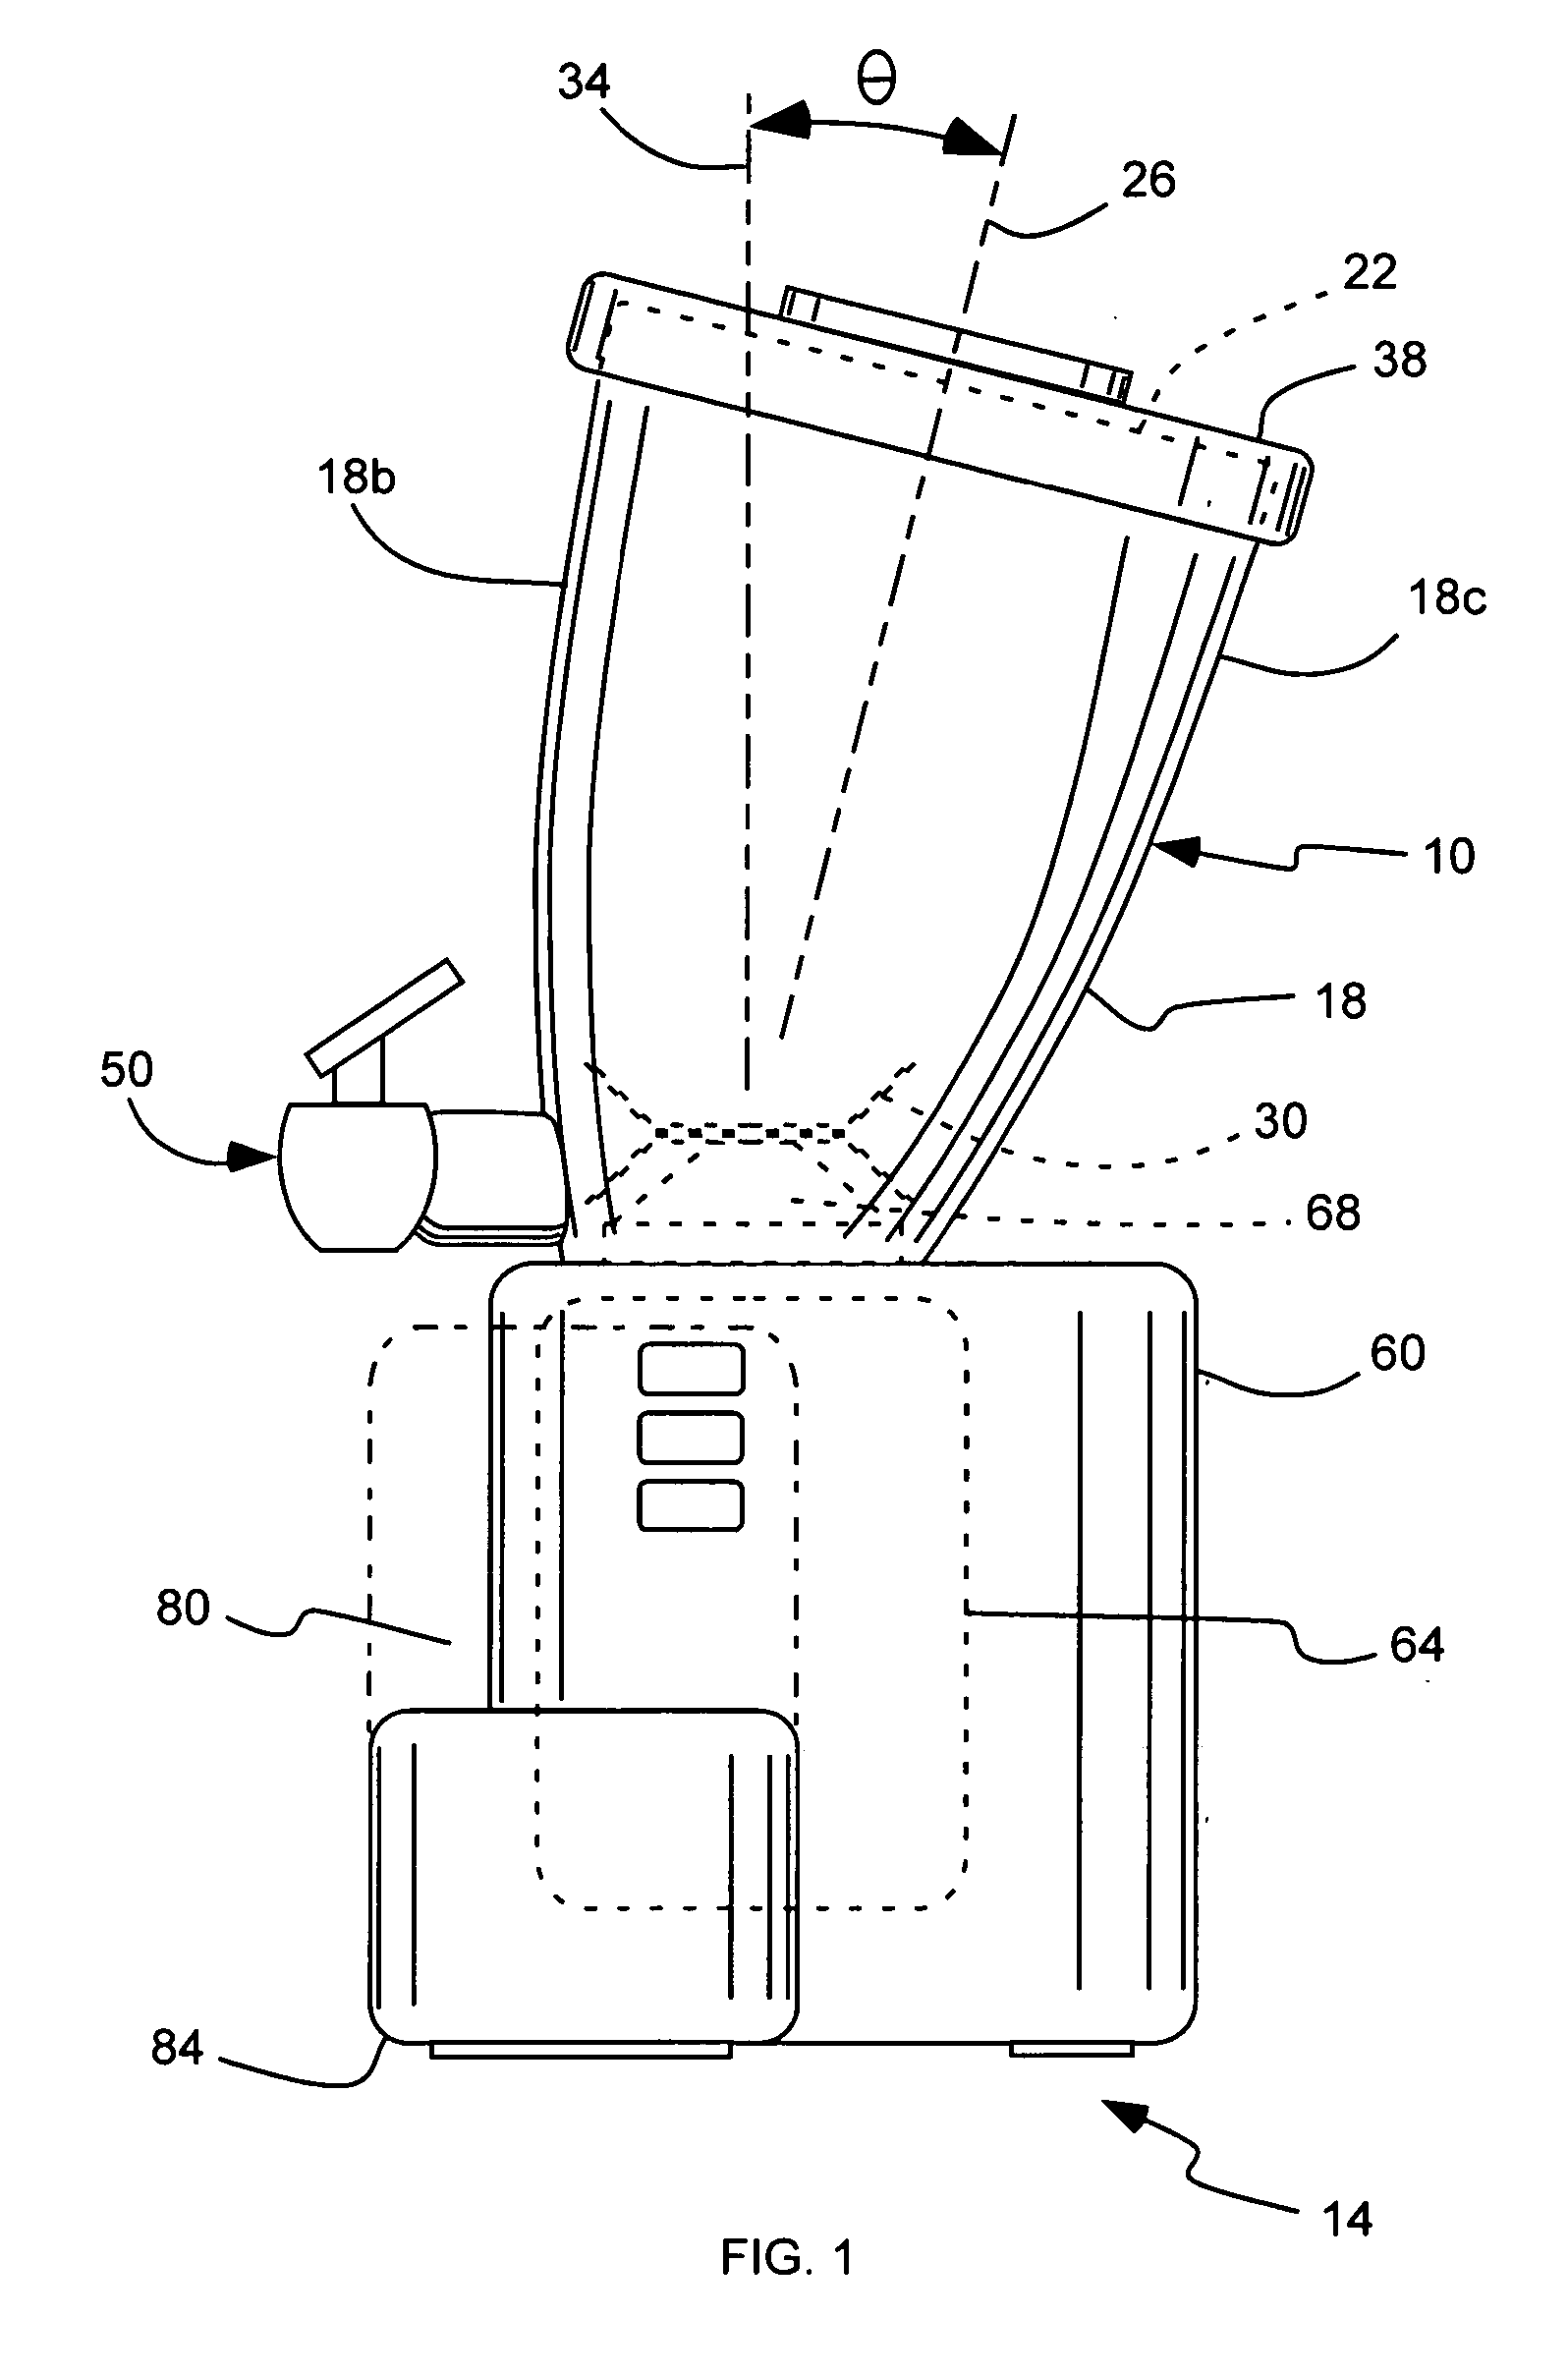 Off-axis goblet for food mixer